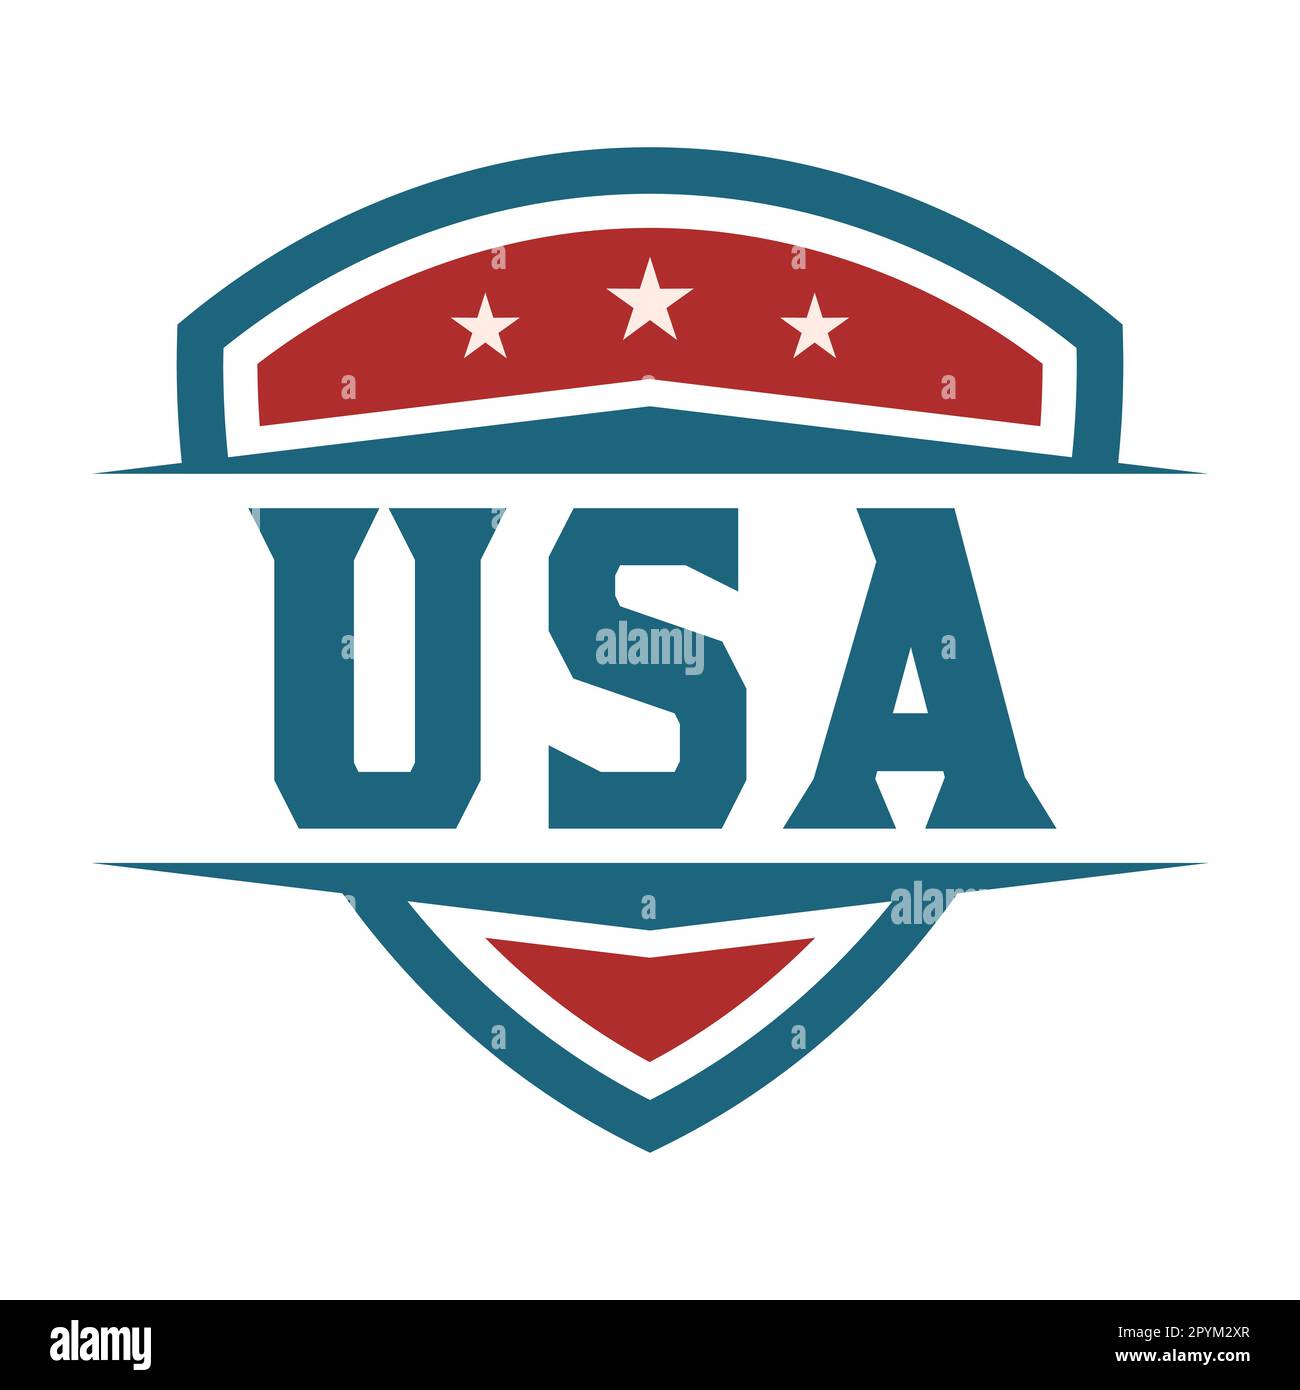 Powerful USA shield logo. American patriotic emblem. Sport team USA flag symbol. Blue, red, white colors graphic elements. Three stars. Vector Stock Vector